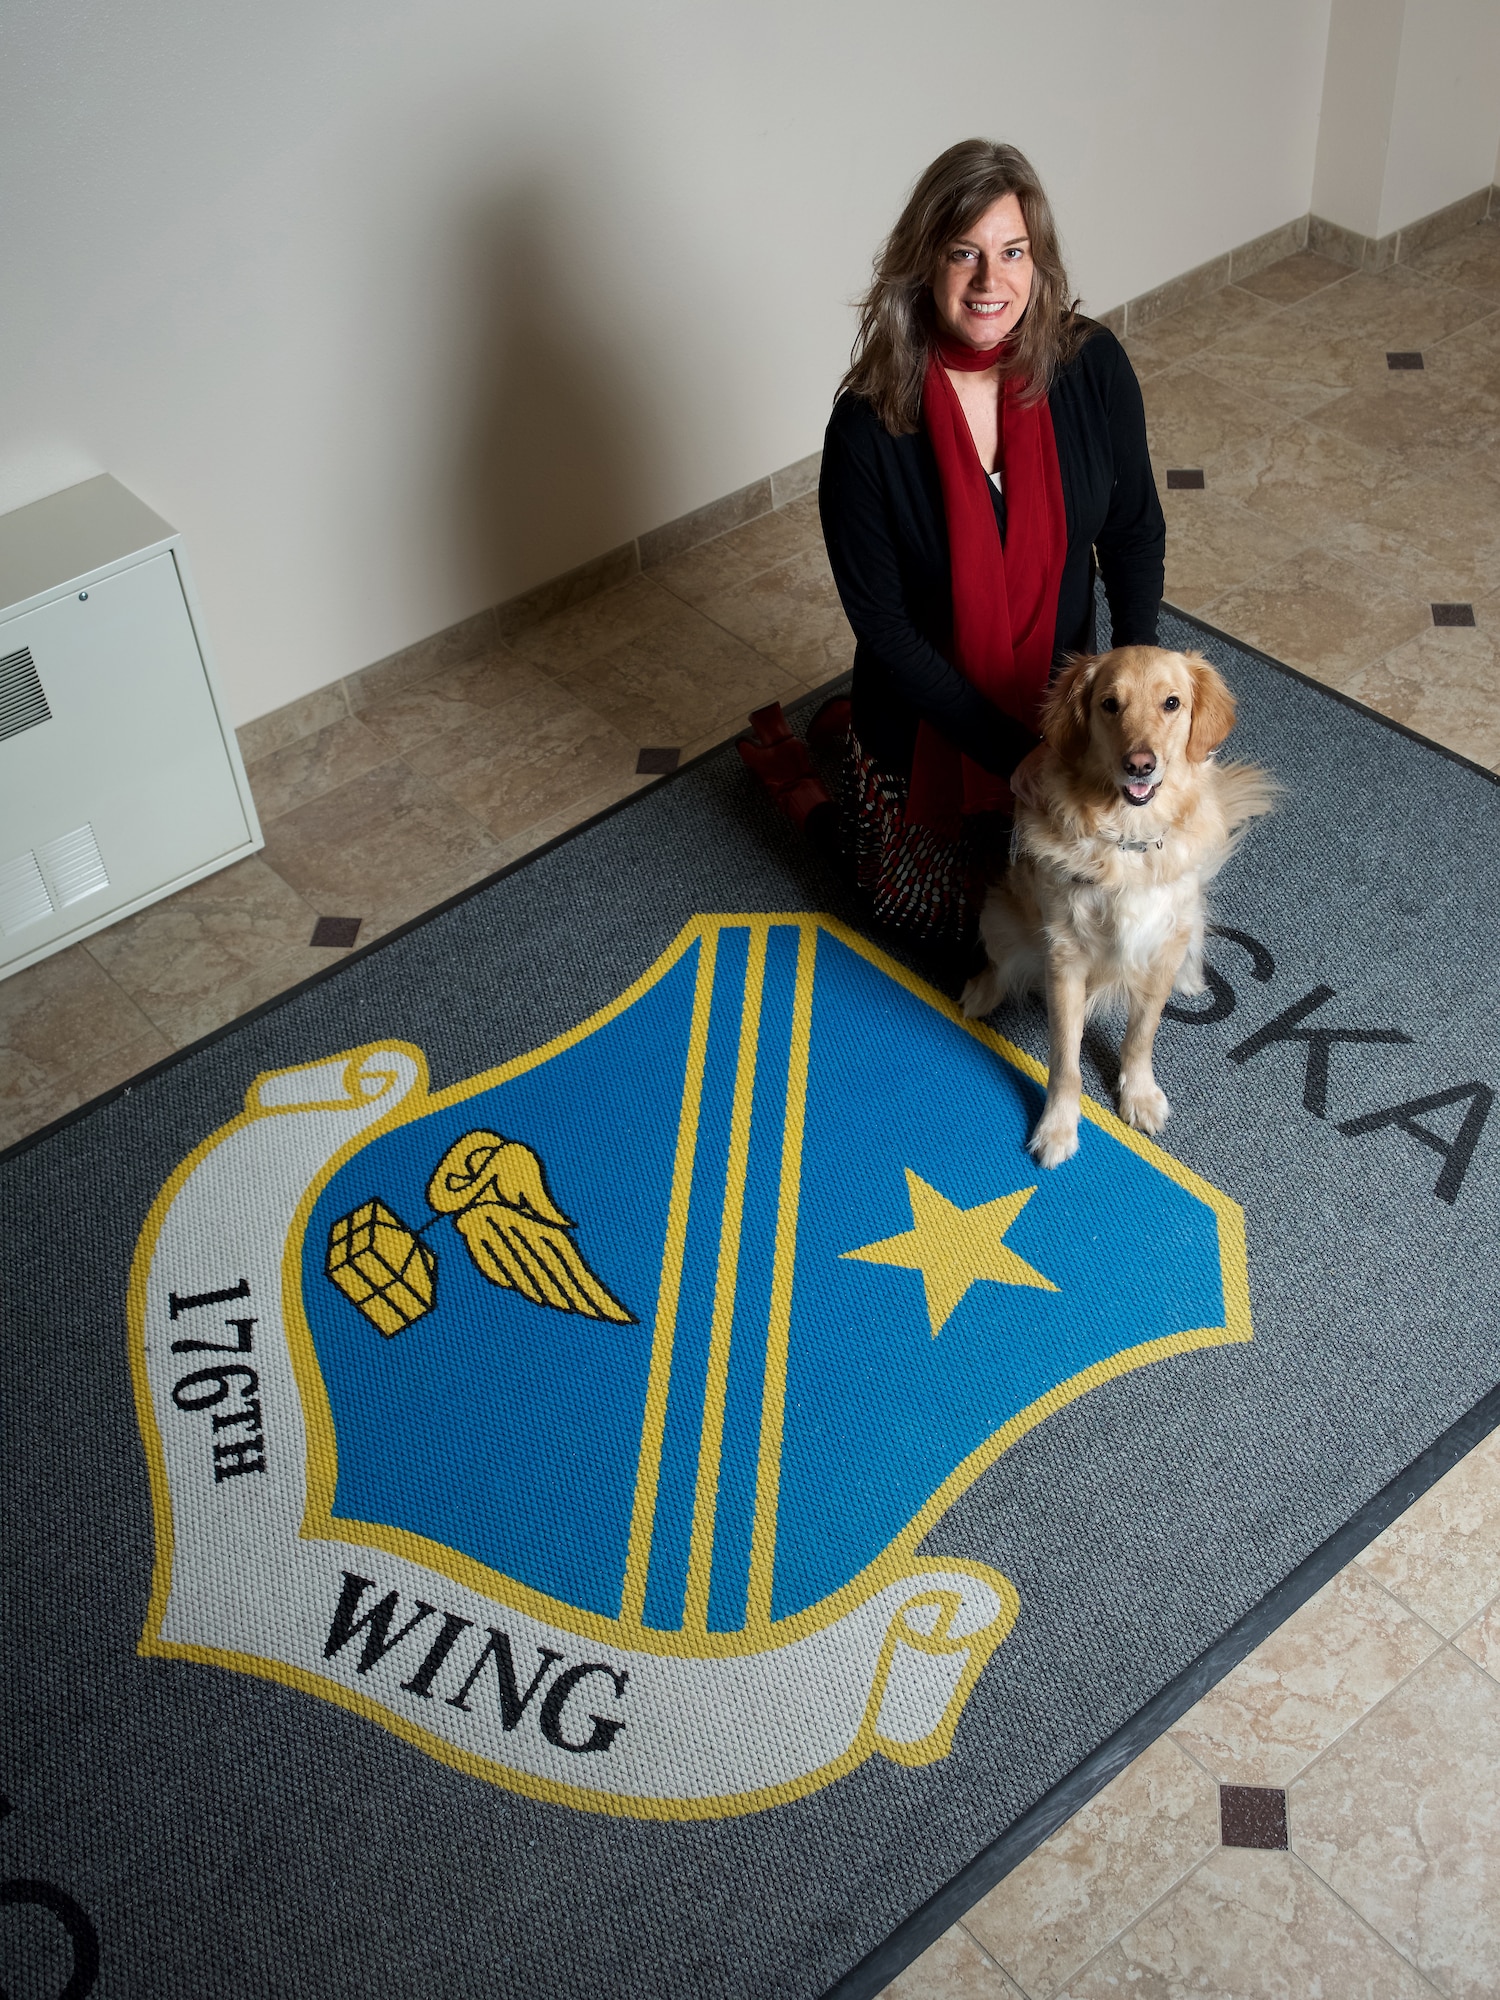 Diann Richardson, 176th Wing director of psychological health, regularly works with therapy dog, Bolt, as part of the licensed clinical social worker’s outreach to the wing. Following several months of socialization and training, the golden retriever became a nationally certified therapy dog.